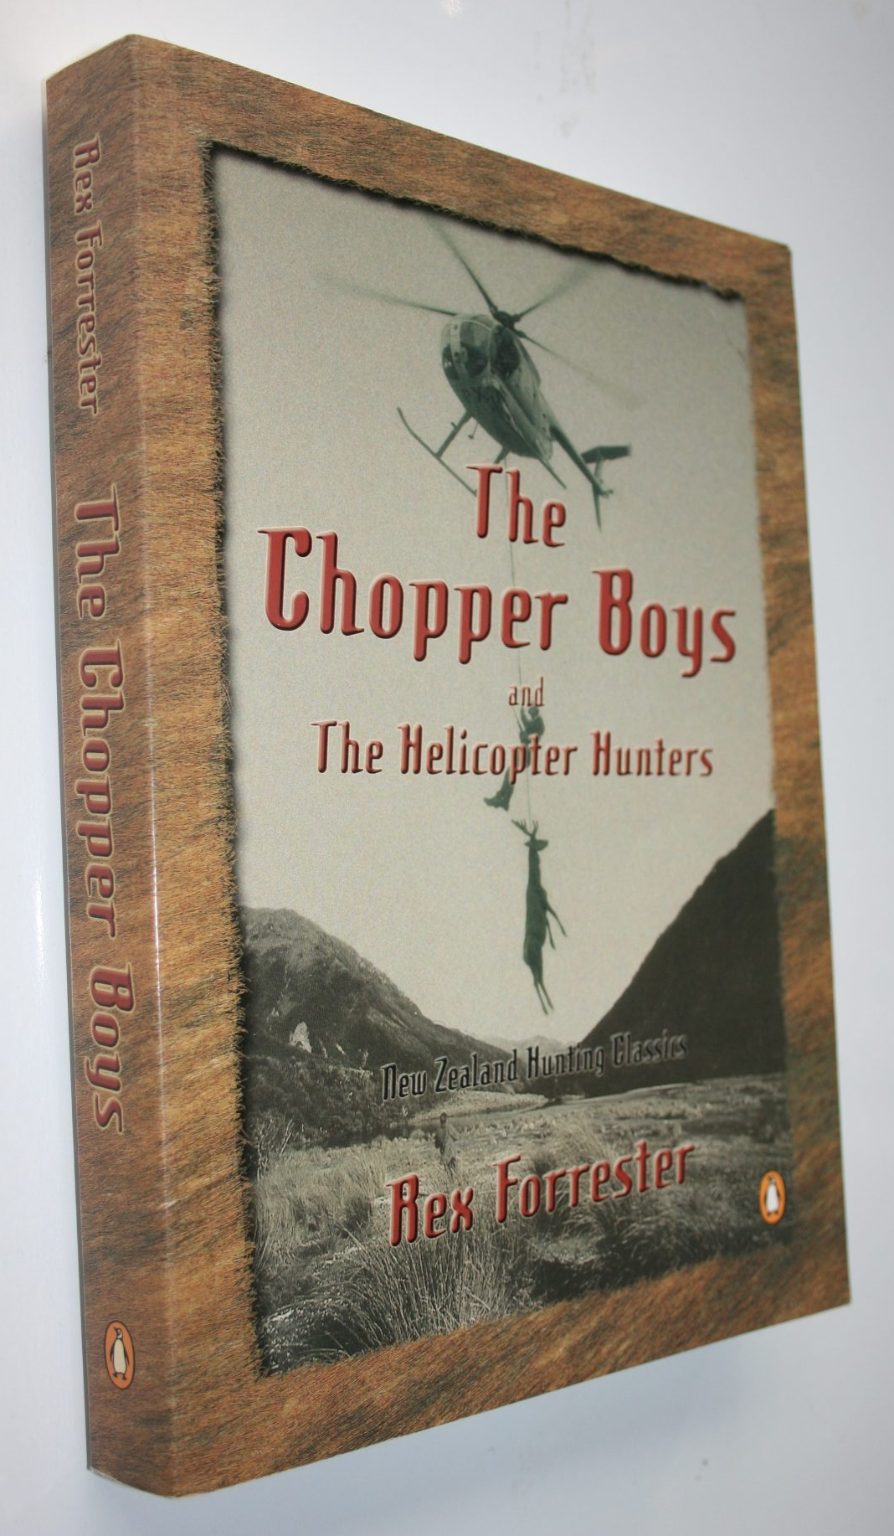 The Chopper Boys and The Helicopter Hunters. New Zealand Hunting Classics.